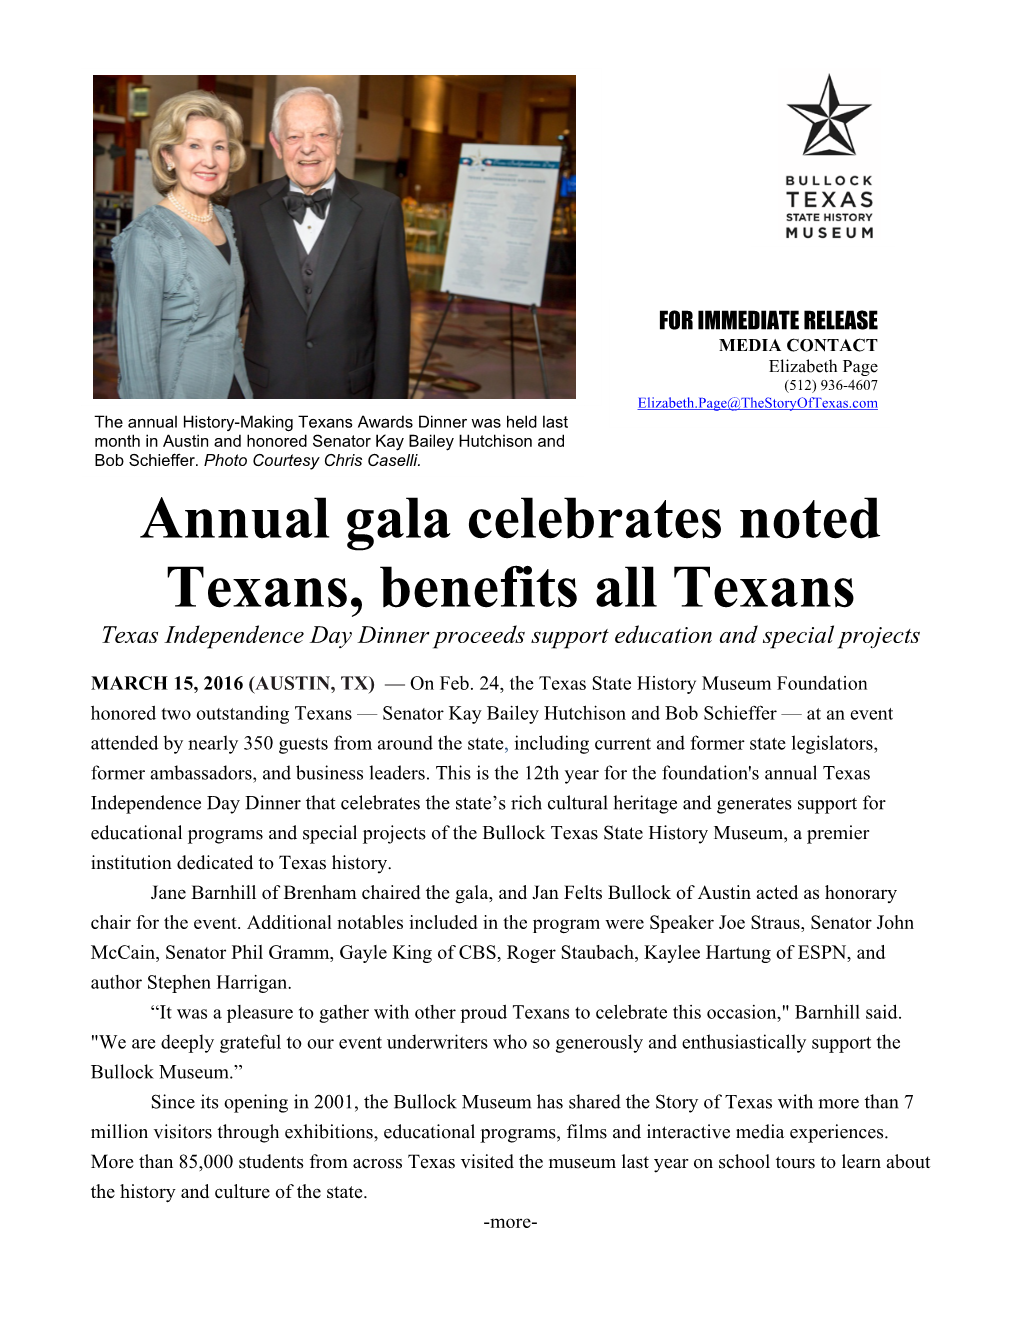 Annual Gala Celebrates Noted Texans, Benefits All Texans Texas Independence Day Dinner Proceeds Support Education and Special Projects